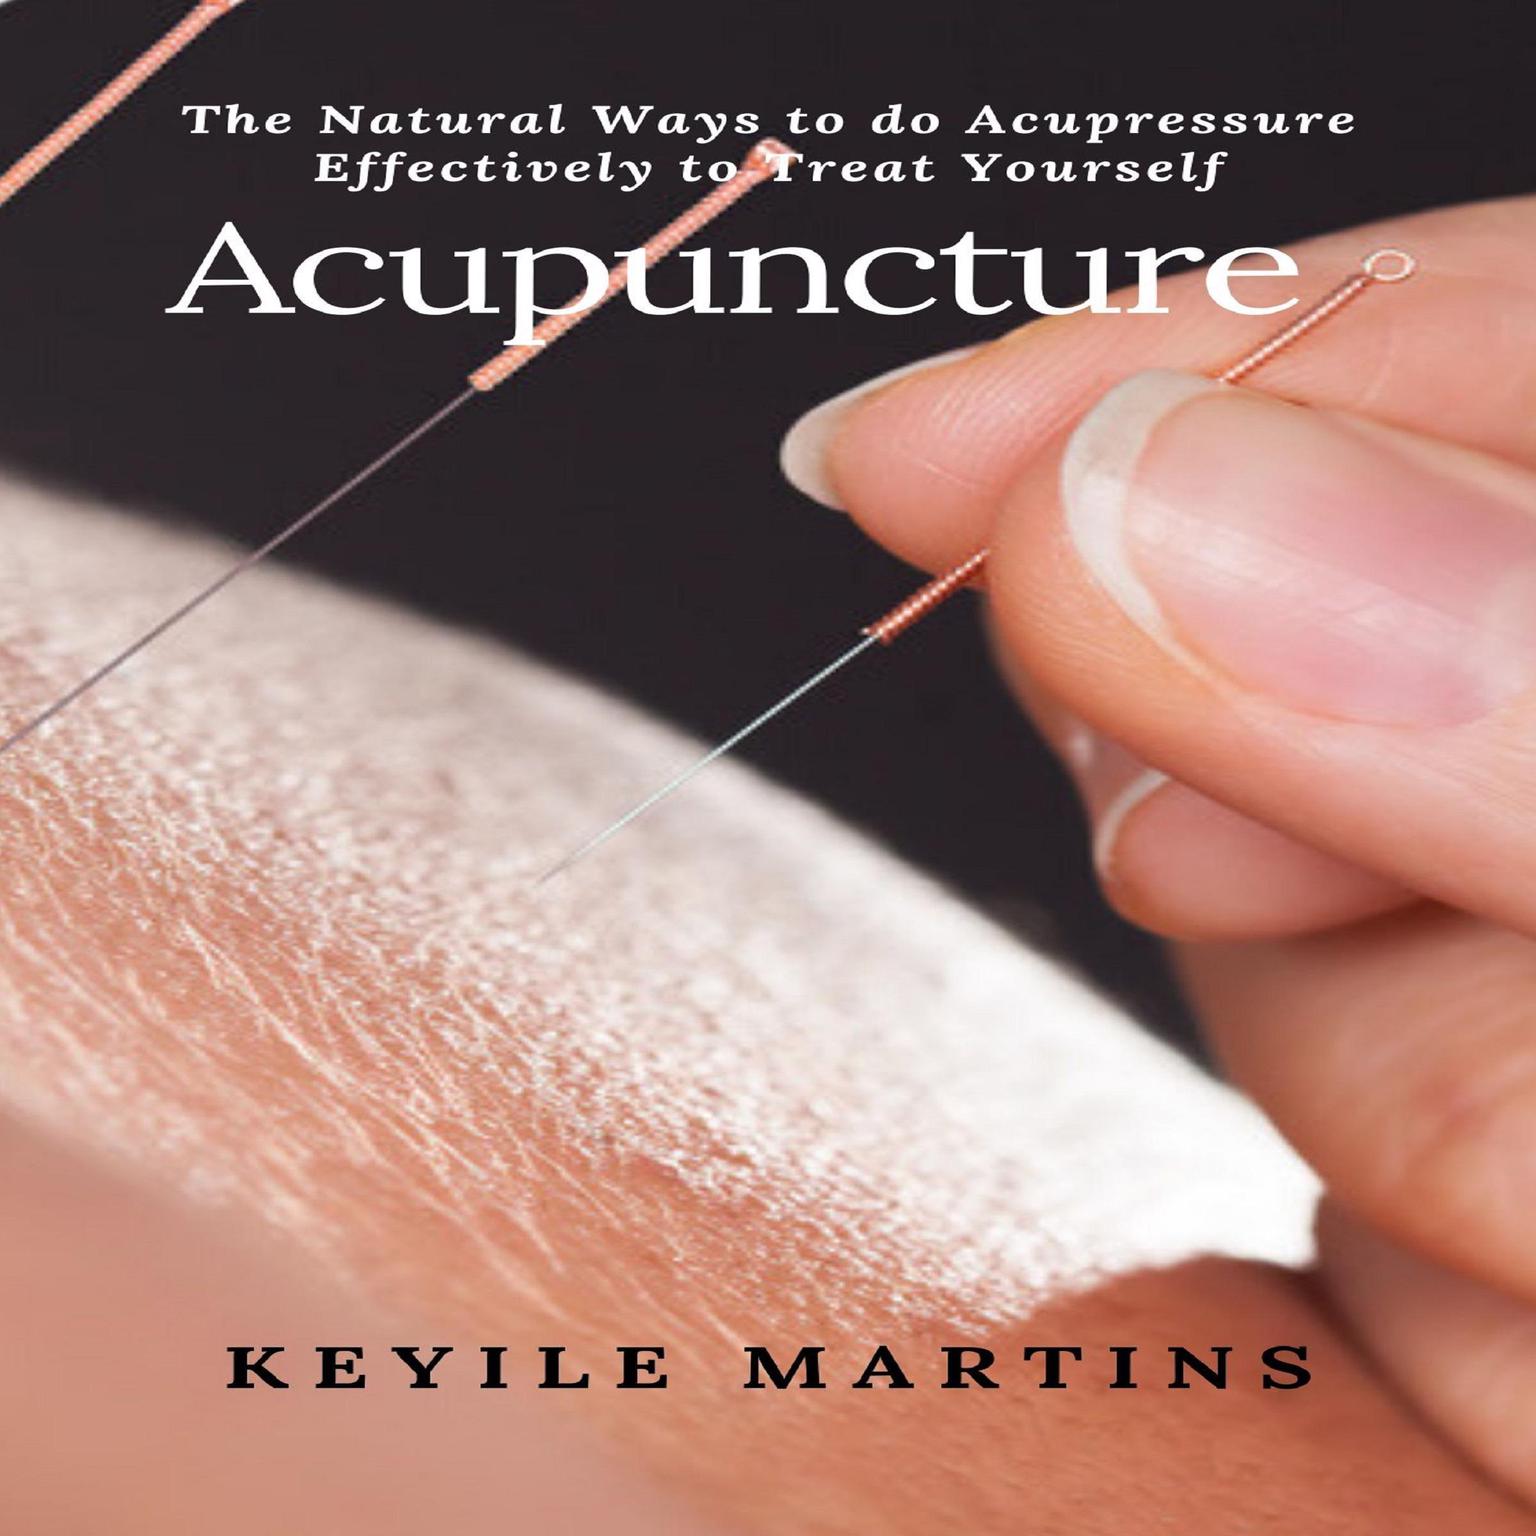 Acupuncture: The Natural Ways to Do Acupressure Effectively to Treat Yourself Audiobook, by Keyile Martins